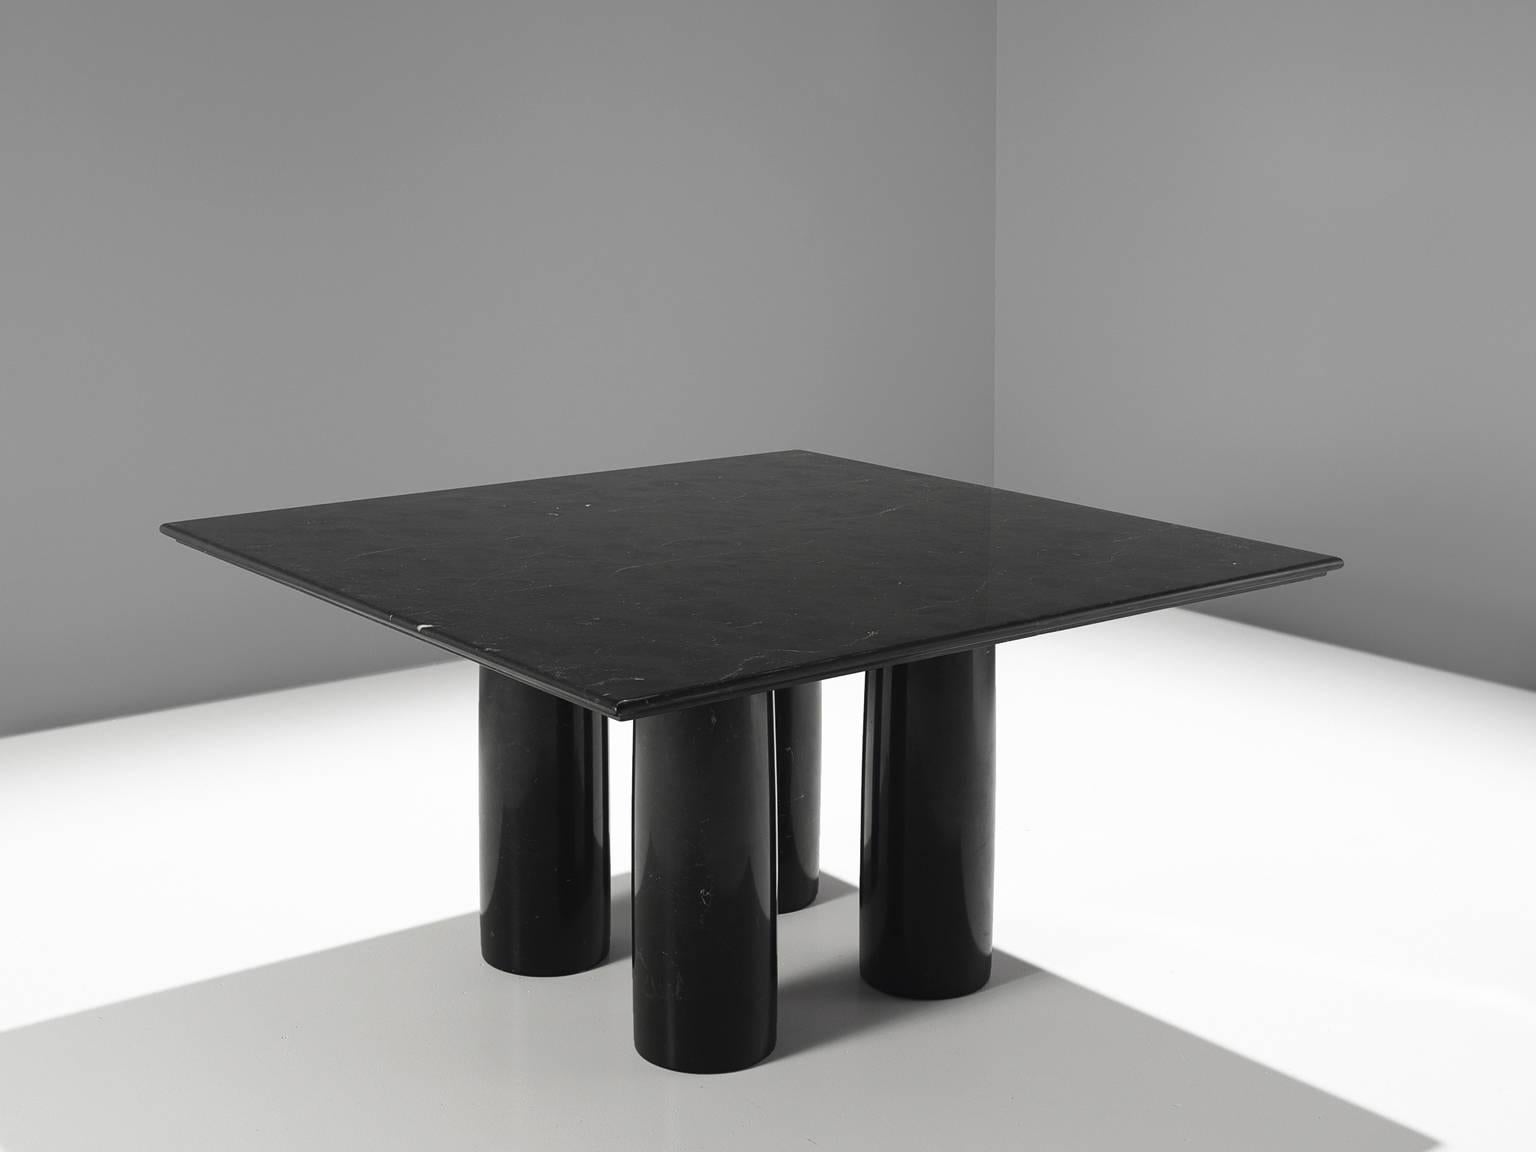 Table 'Il Colonnato', in marble, by Mario Bellini for Cassina, Italy, 1970s.

This 'Il Colonnato' dining table was designed by Italian designer Mario Bellini. For this series of tables, Bellini was inspired by ancient Roman columns. This centre